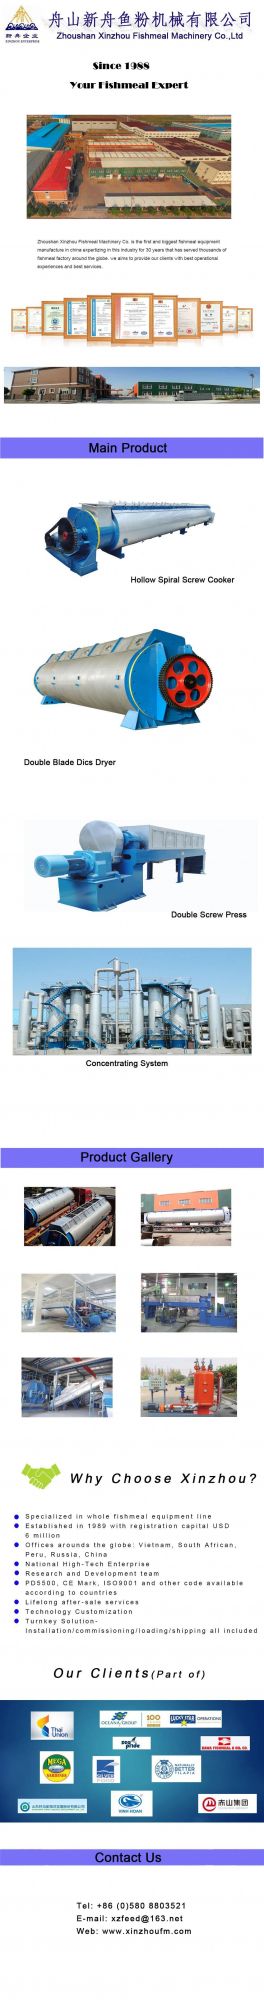 Square Stainless/Galvanized/HDG Steel Counter/Cross Flow Closed Circuit/Loop Wet Air/Evaporative/Water Cooling Tower